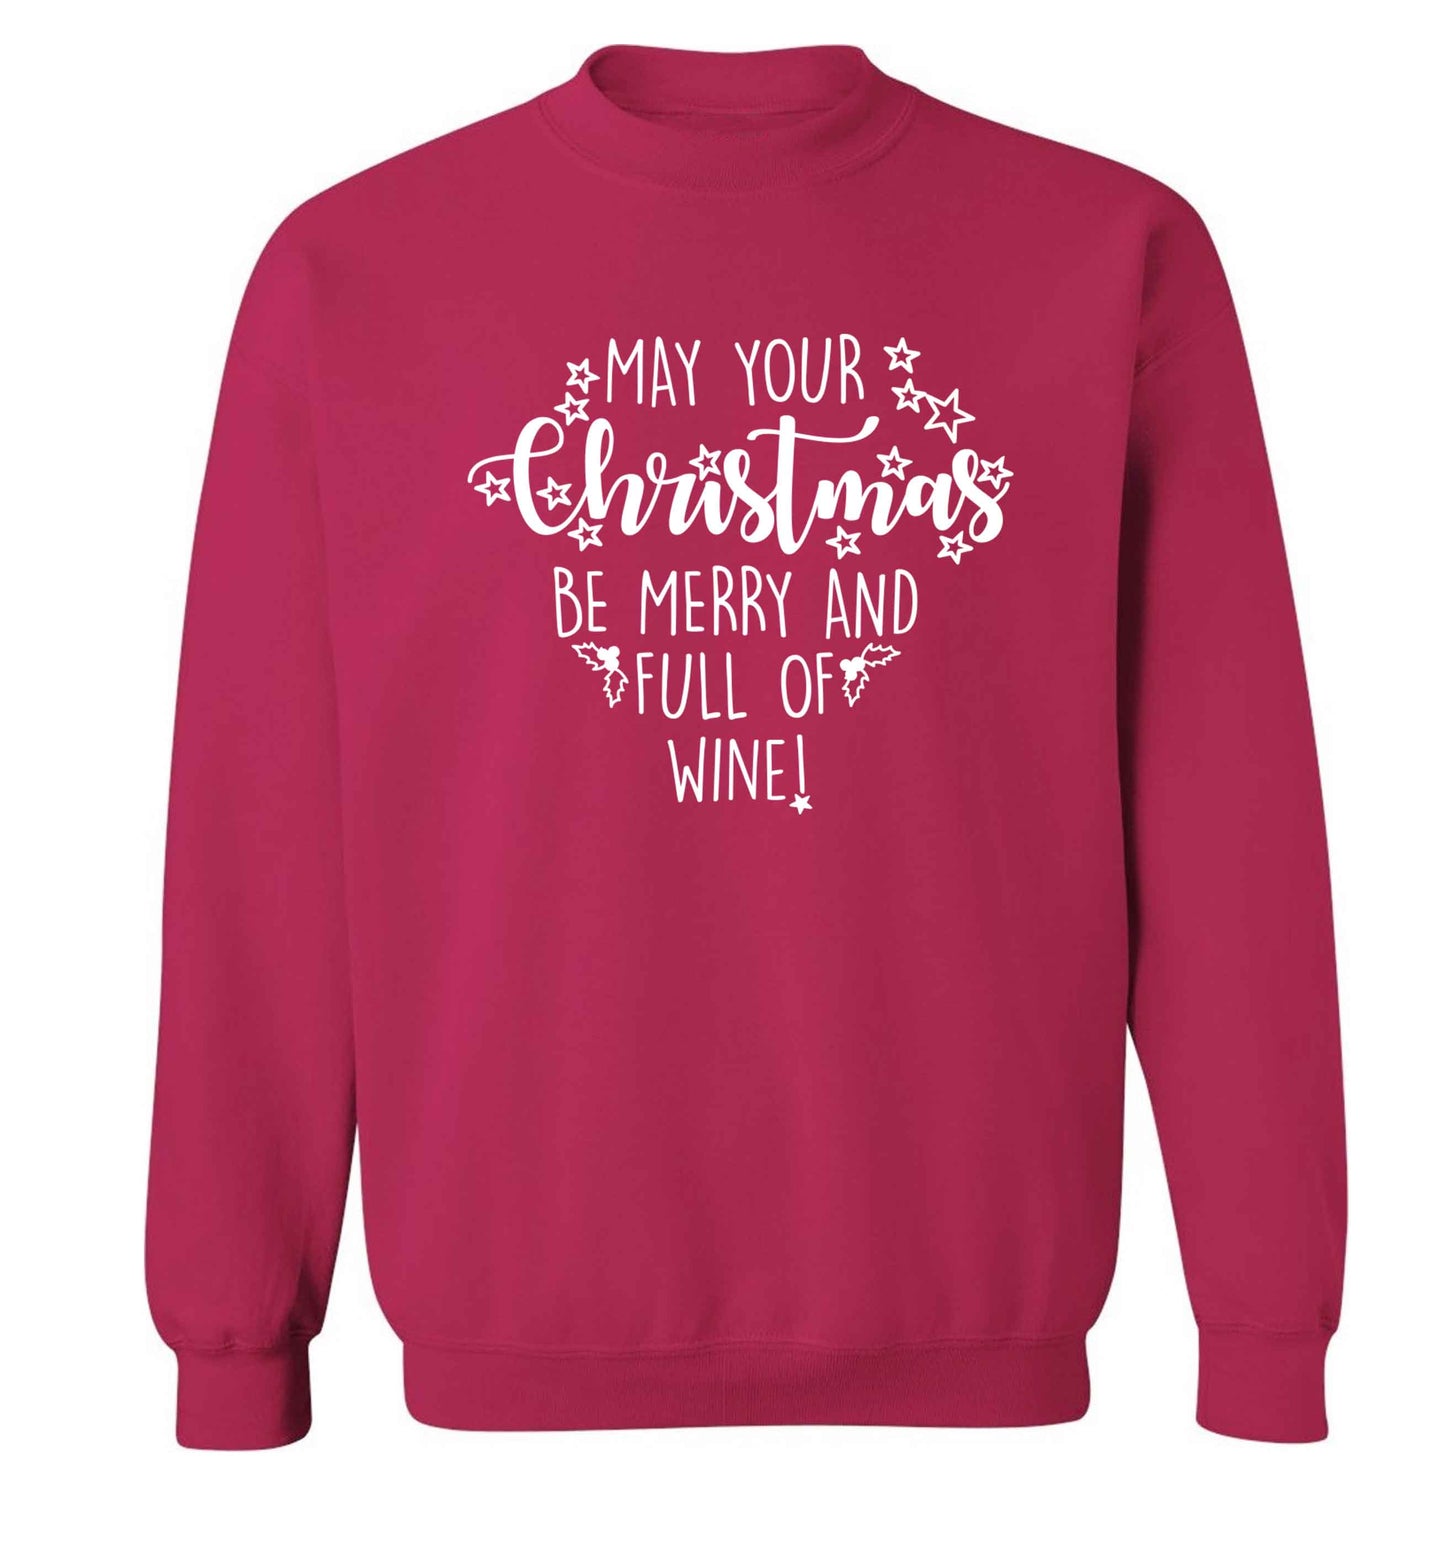 May your Christmas be merry and full of wine Adult's unisex pink Sweater 2XL